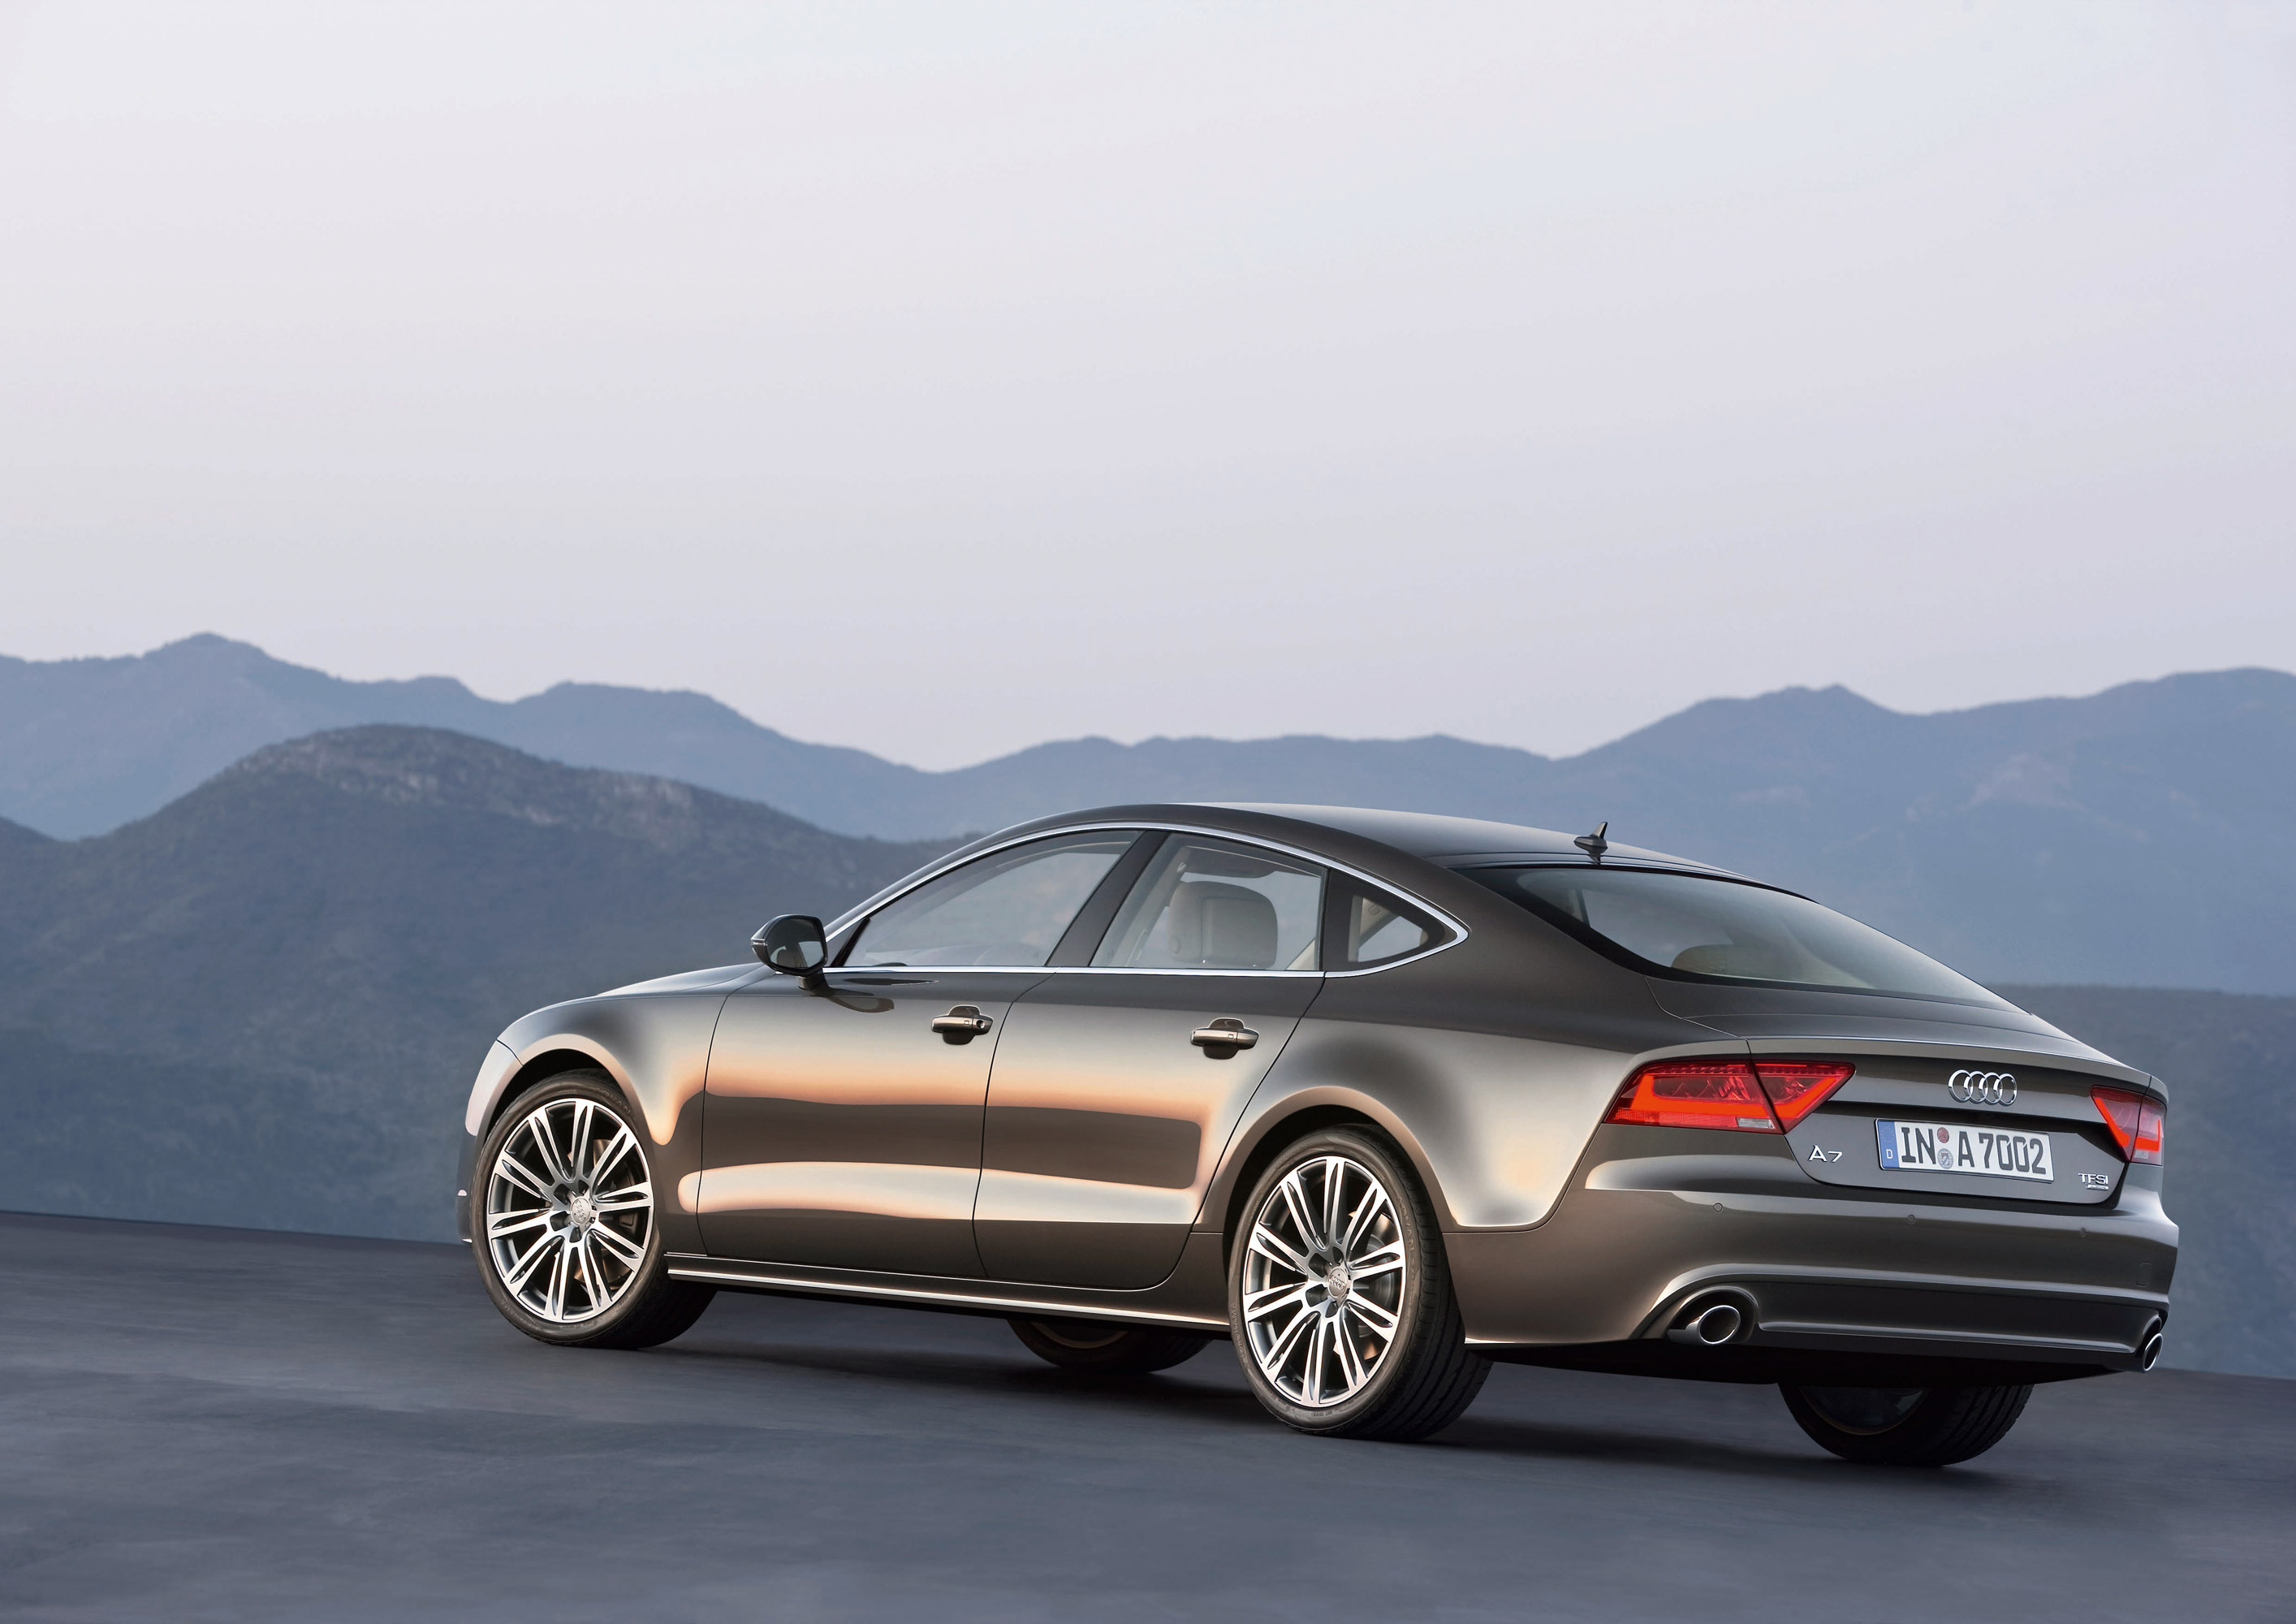 2011 Audi A7 Sportback Completes The Line Up